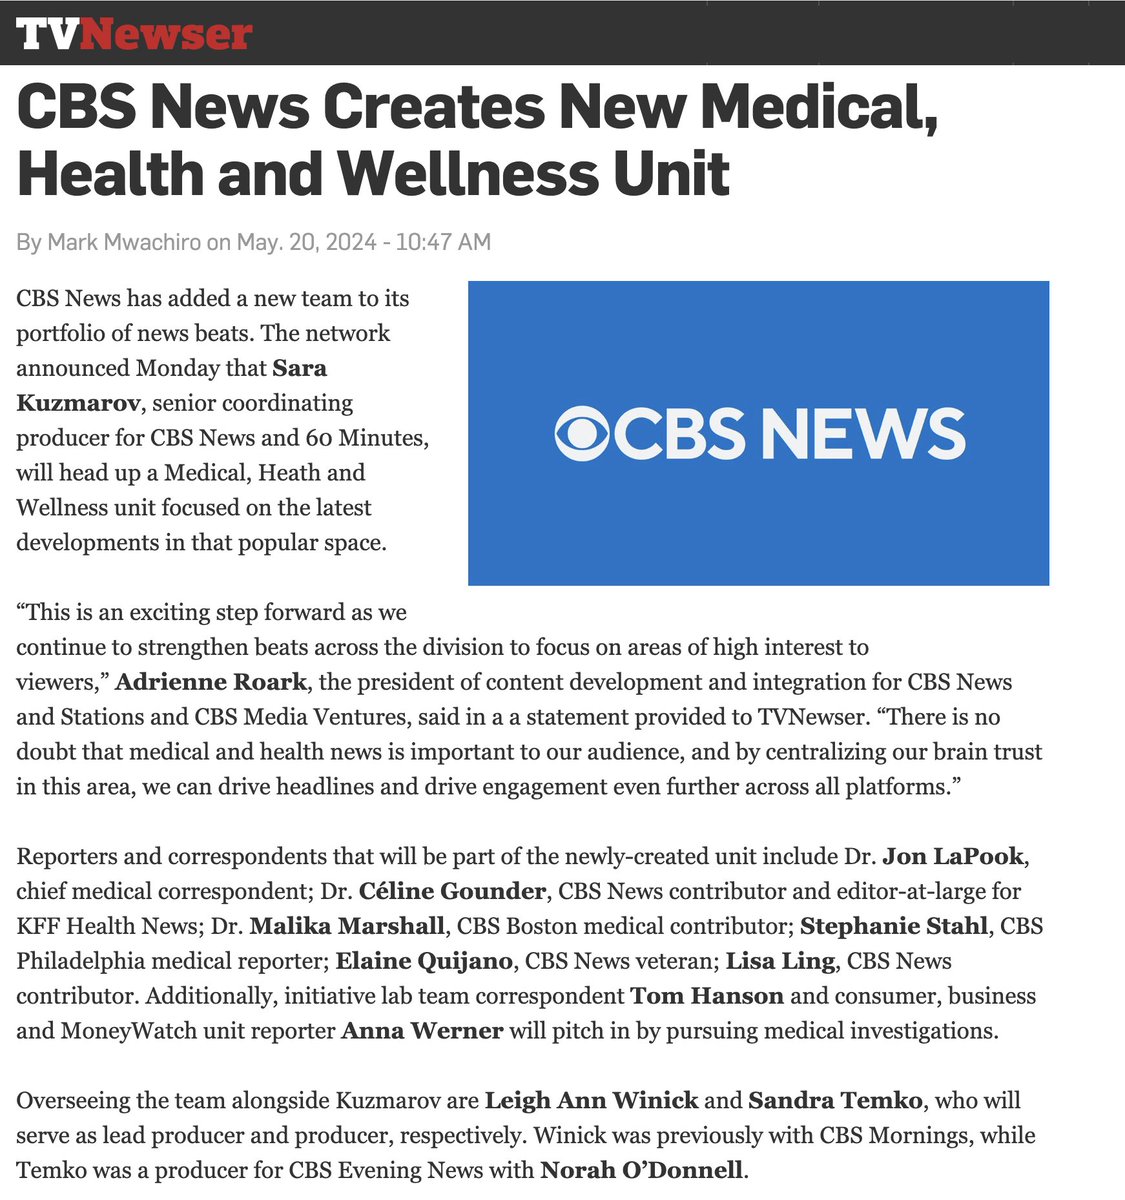 I'm honored to be part of this amazing team at @CBSNews. 🙏🏽🙏🏽🙏🏽 adweek.com/tvnewser/cbs-n…